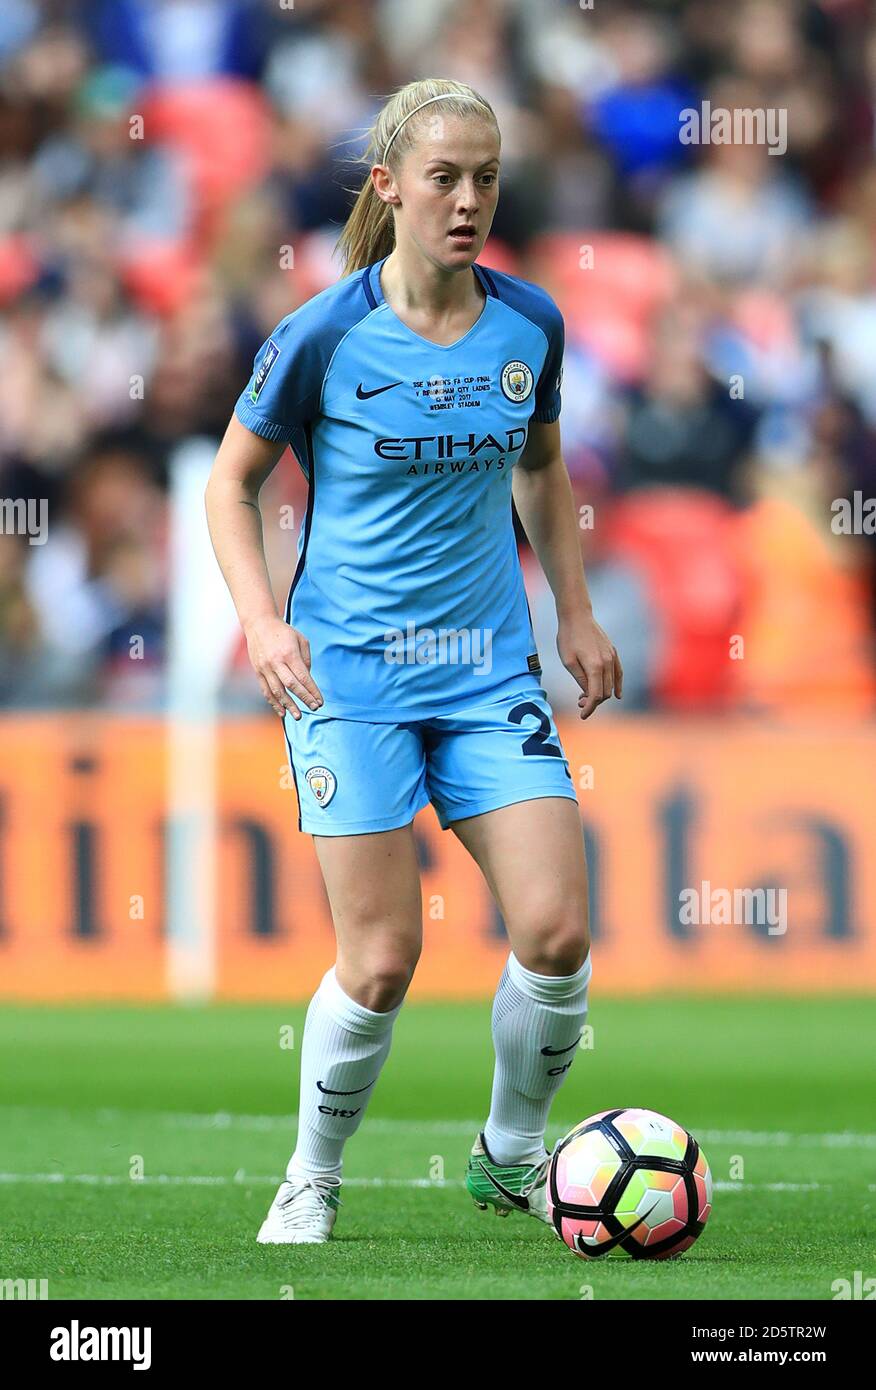 Manchester City's Keira Walsh Stock Photo - Alamy